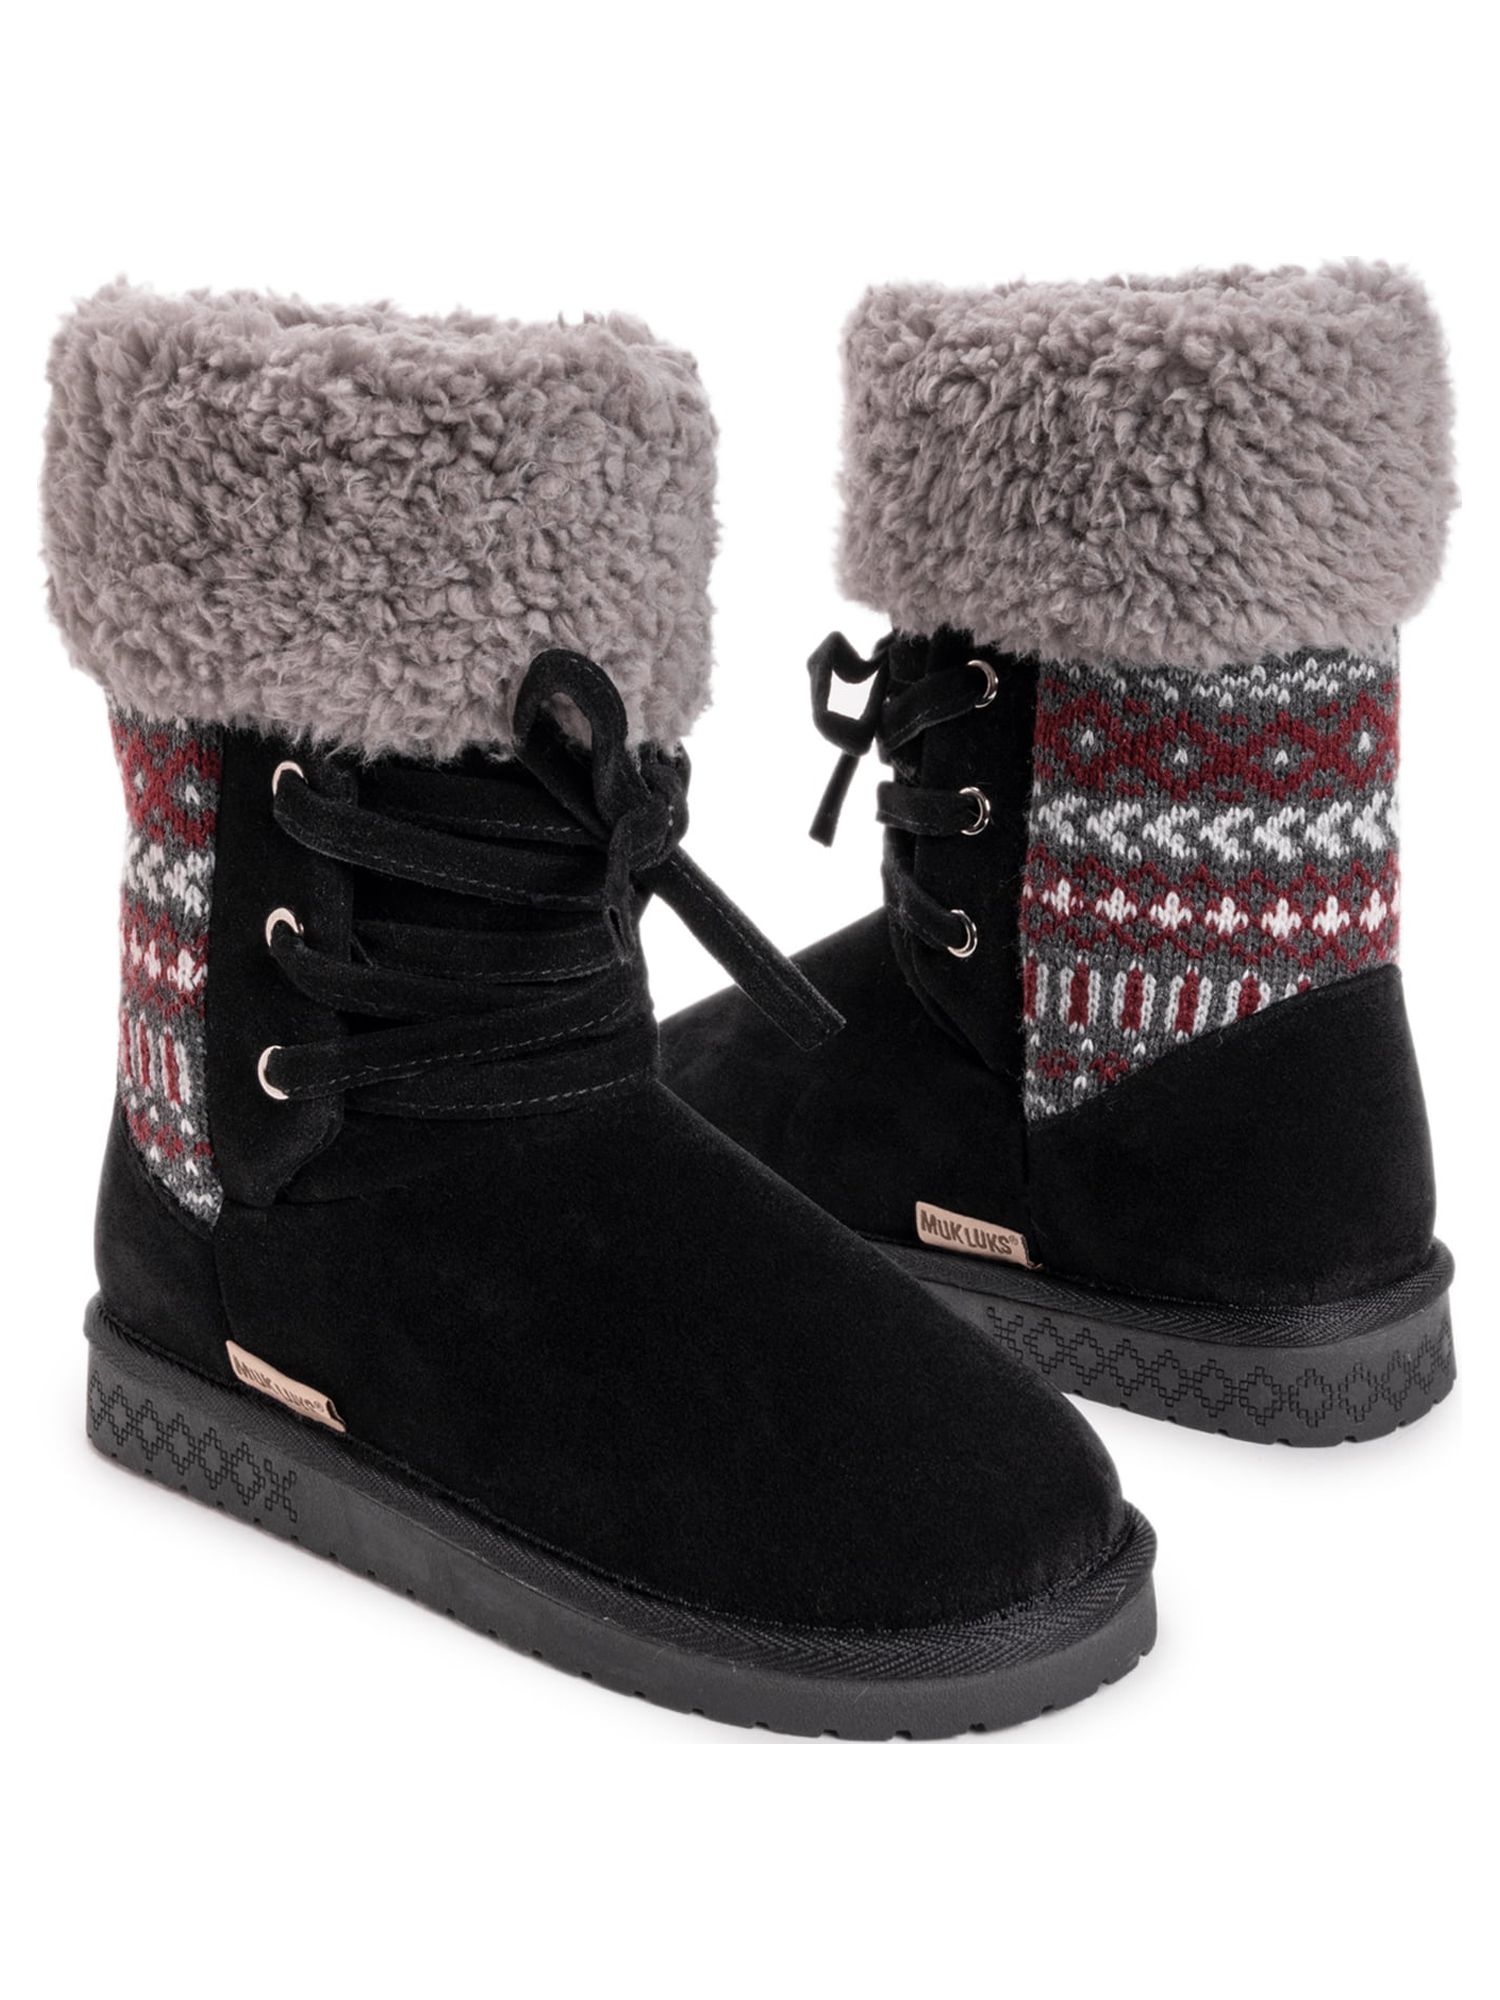 Muk Luks Women's Melba Faux Fur Lined Lace Up Booties (Wide Width Available) - image 4 of 8